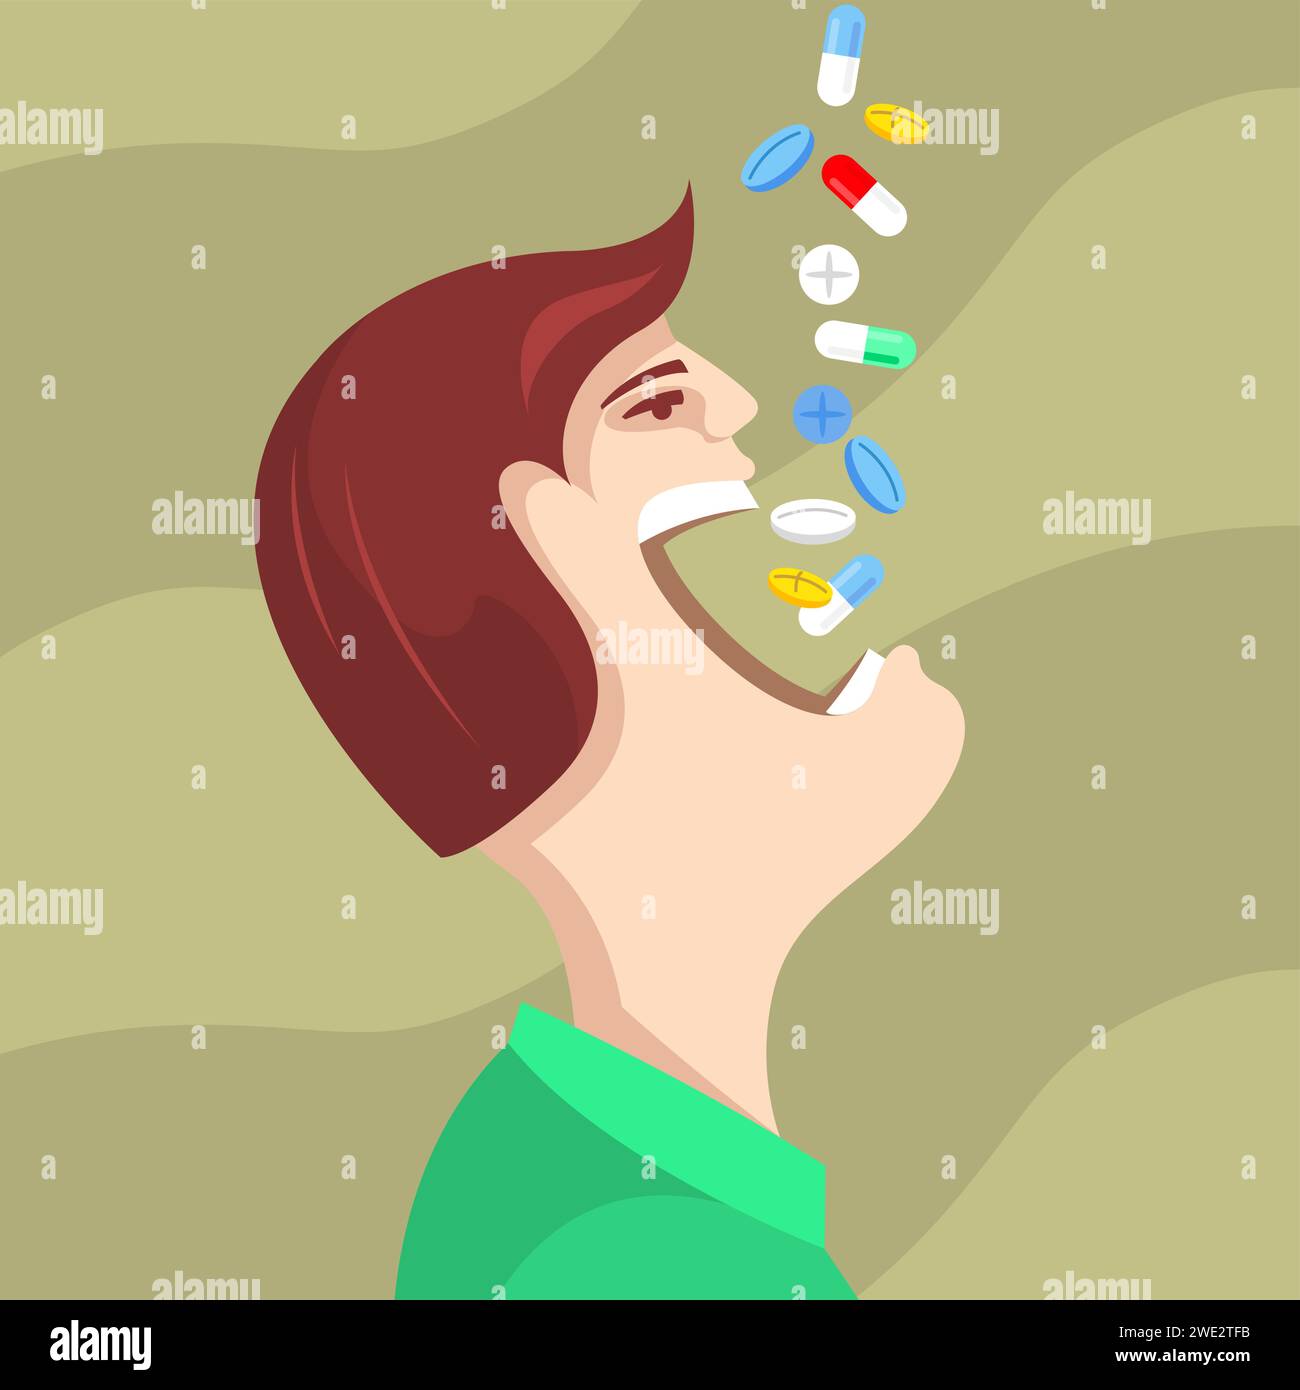 Man swallowing pills, taking the medicine, head of man with open mouth eating pills, vitamins and food additives, vector Stock Vector